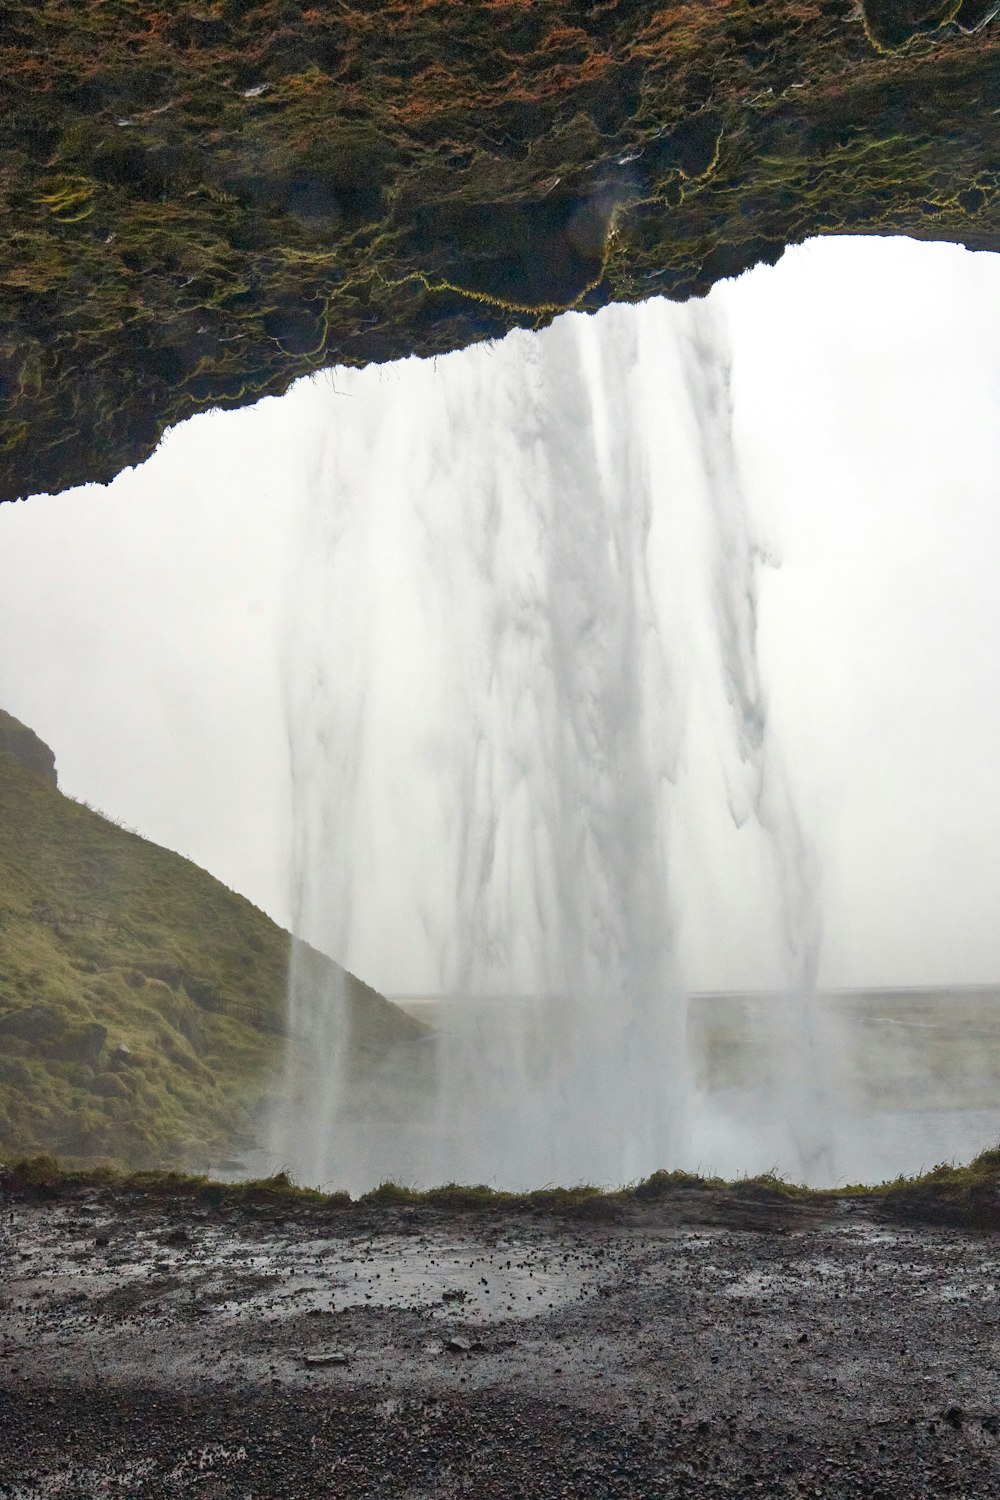 a view of a waterfall through a hole in the ground